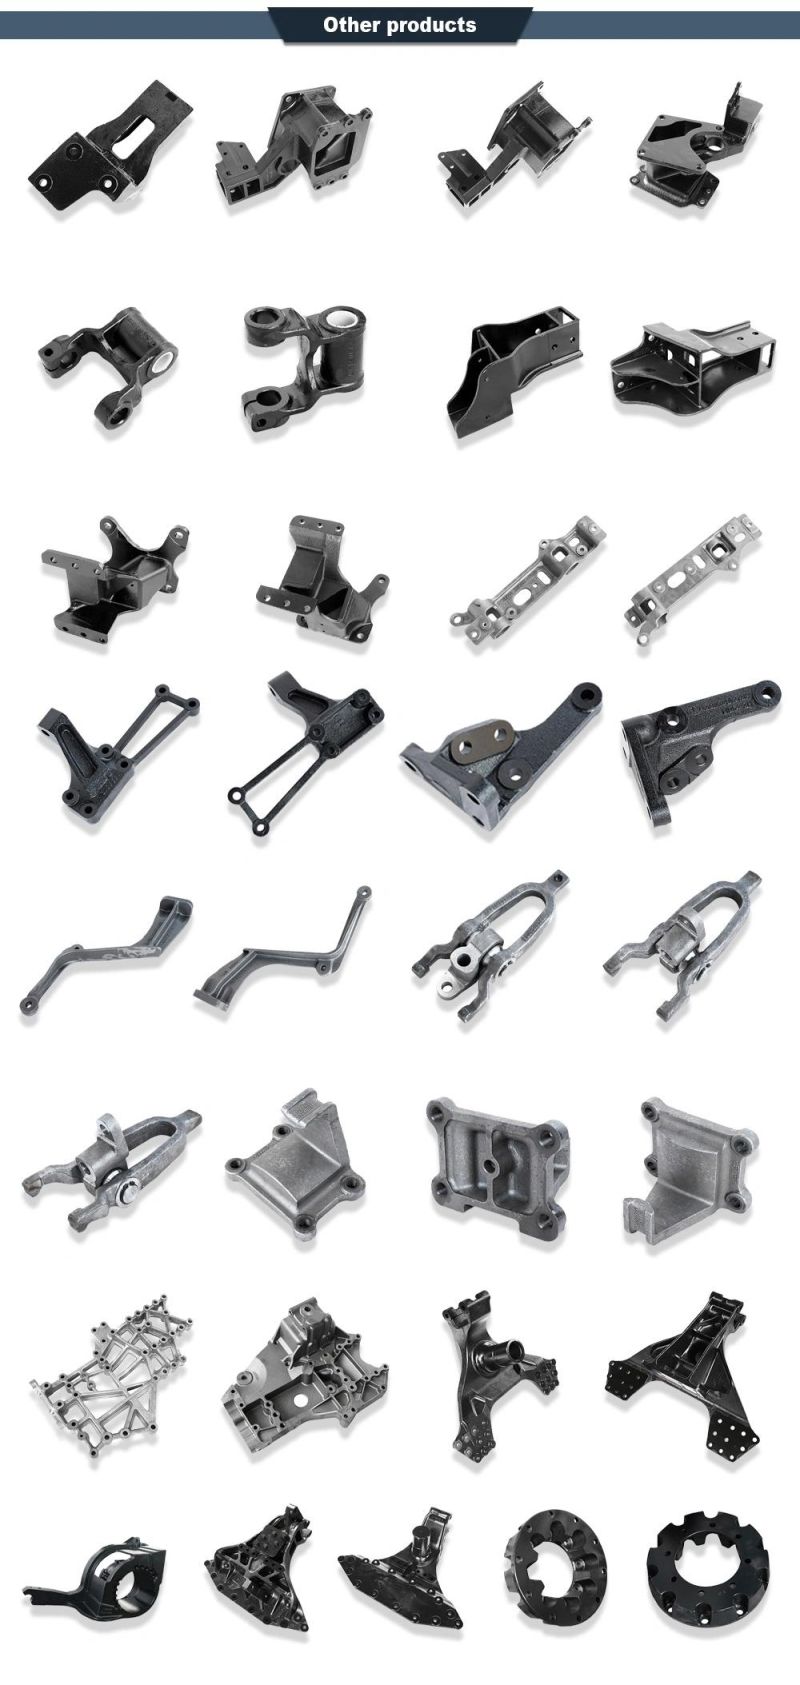 Truck Frame/Transmission/Axle/Engine/Truck Parts on Sale